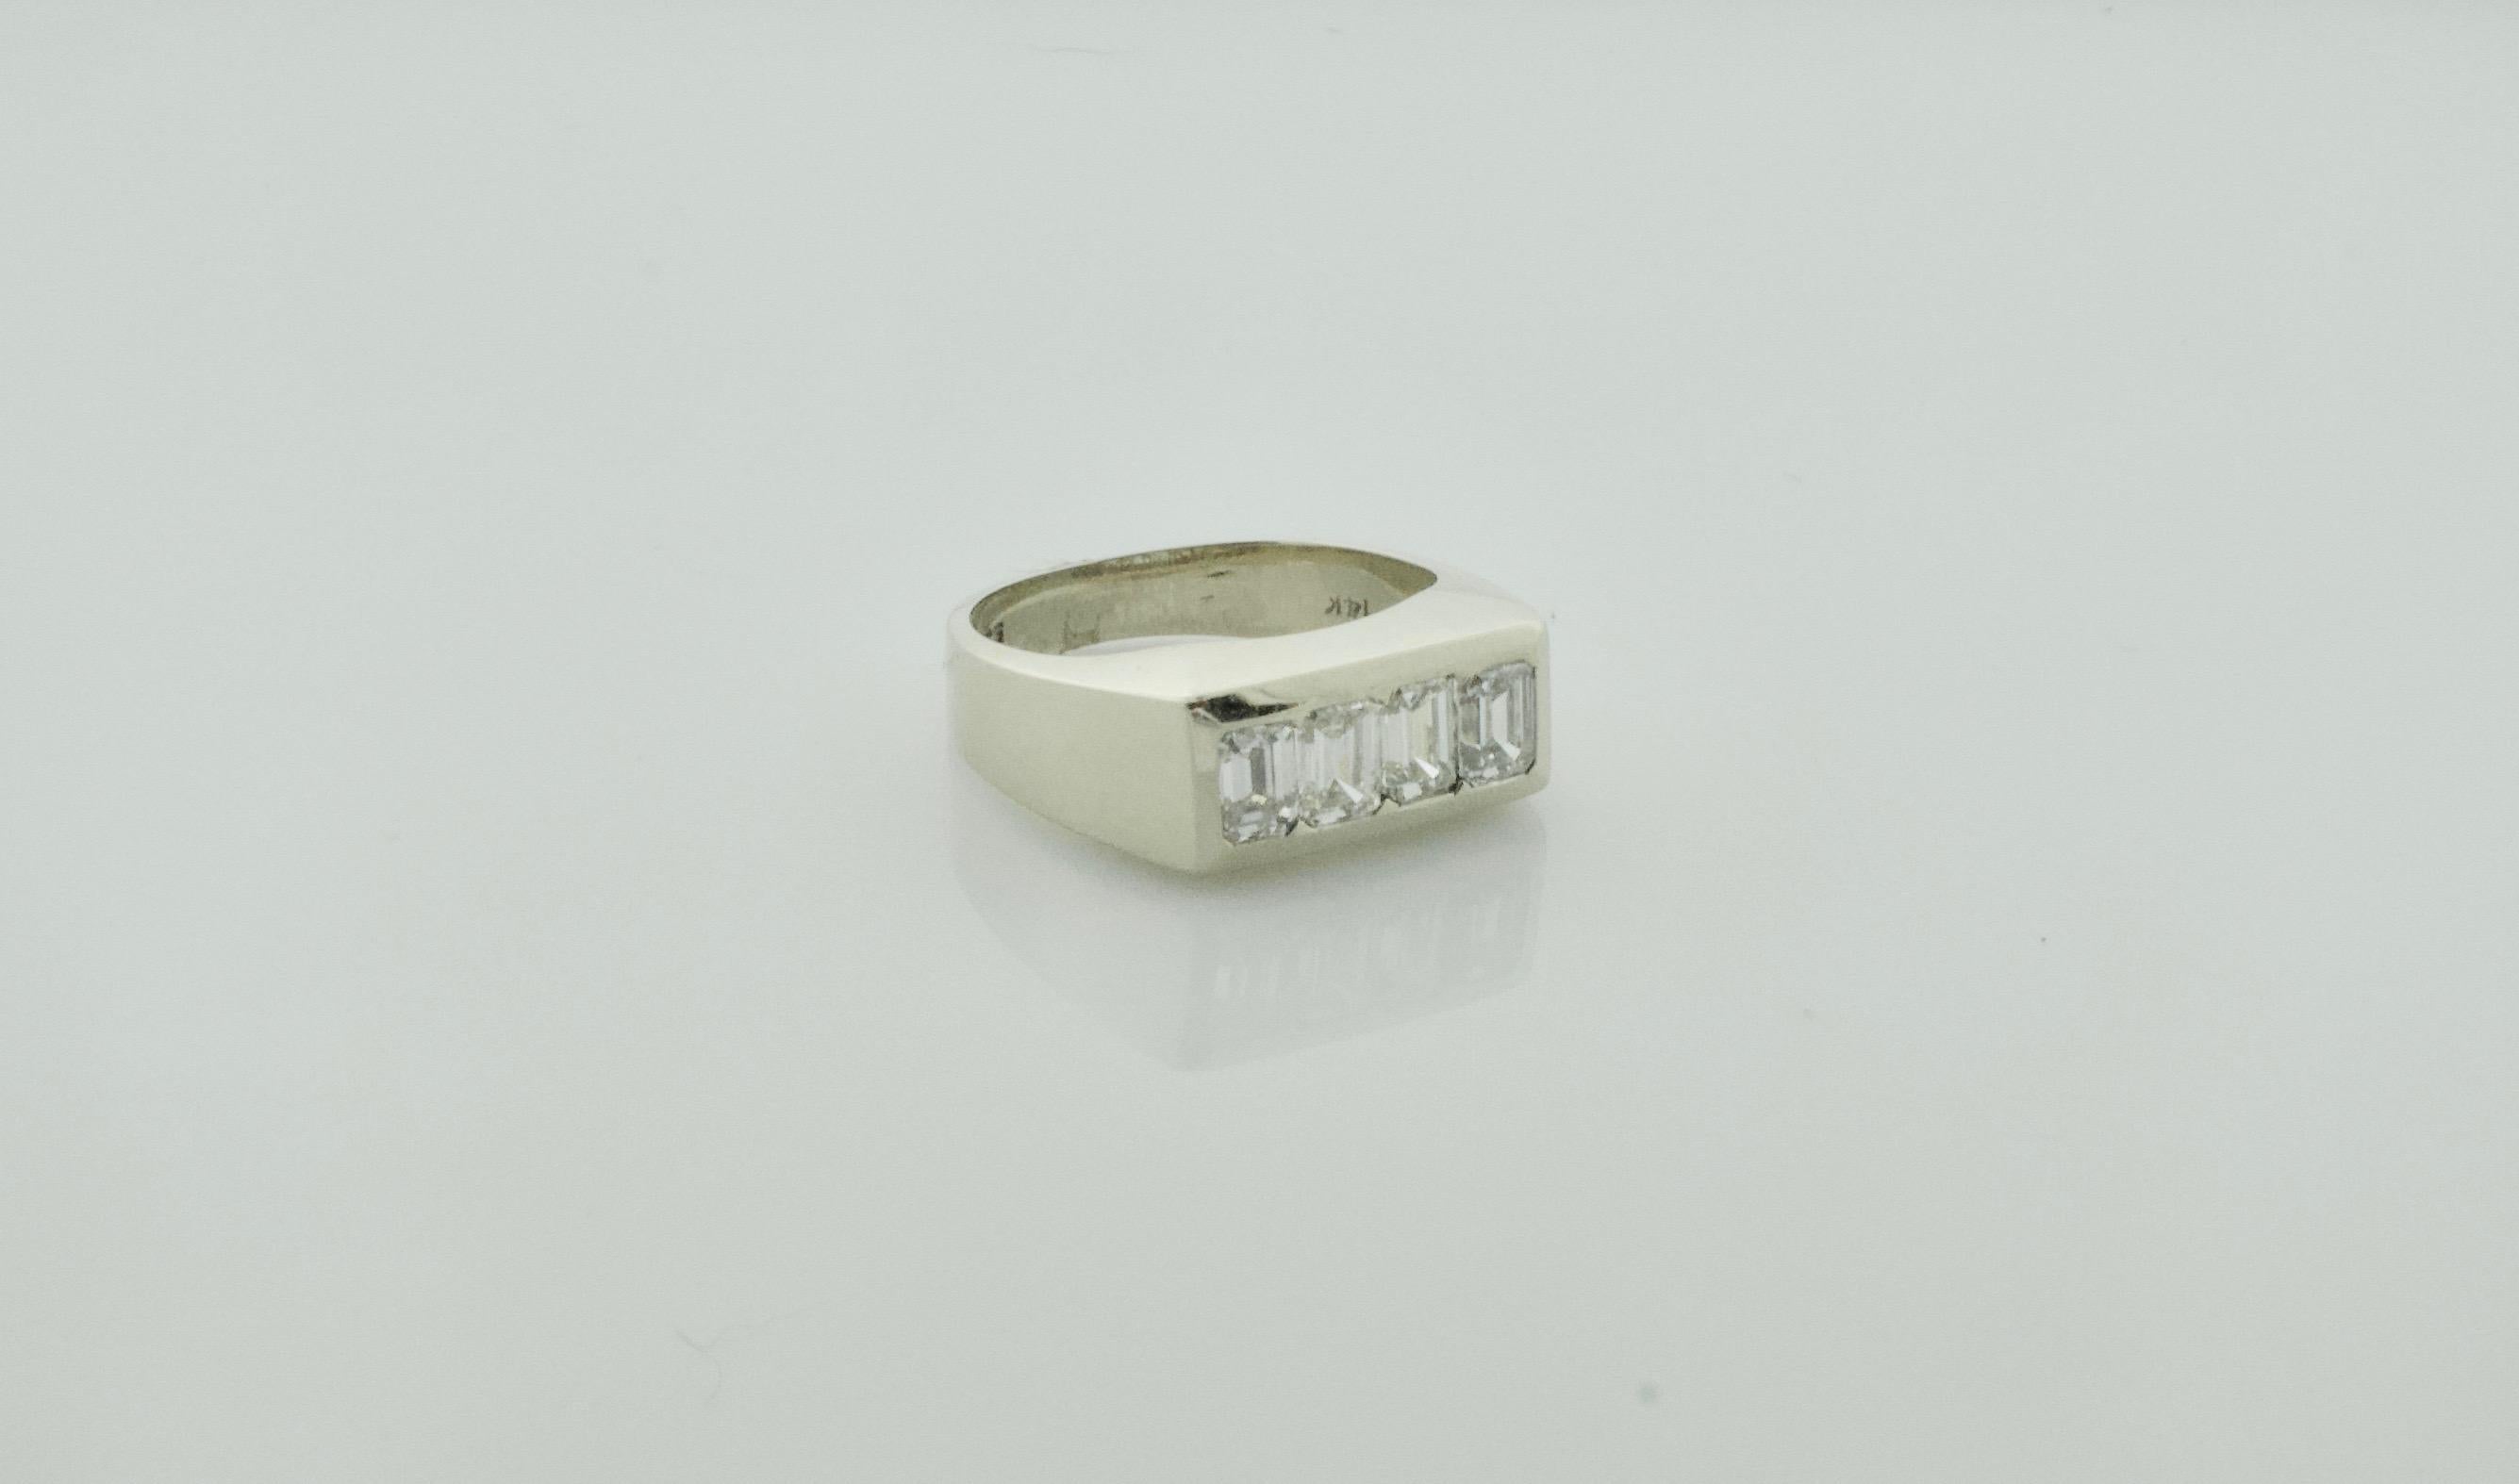 1940's Diamond Ring 1.20 Carats of Emerald Cuts
This is a Delightful Non-Gender Conforming Ring 
Four Emerald Cut Diamonds Weighing 1.20 Carats Approximately [GHI- VVS-VS1] [bright with no imperfections visible to the naked eye]
Currently Size 6.5